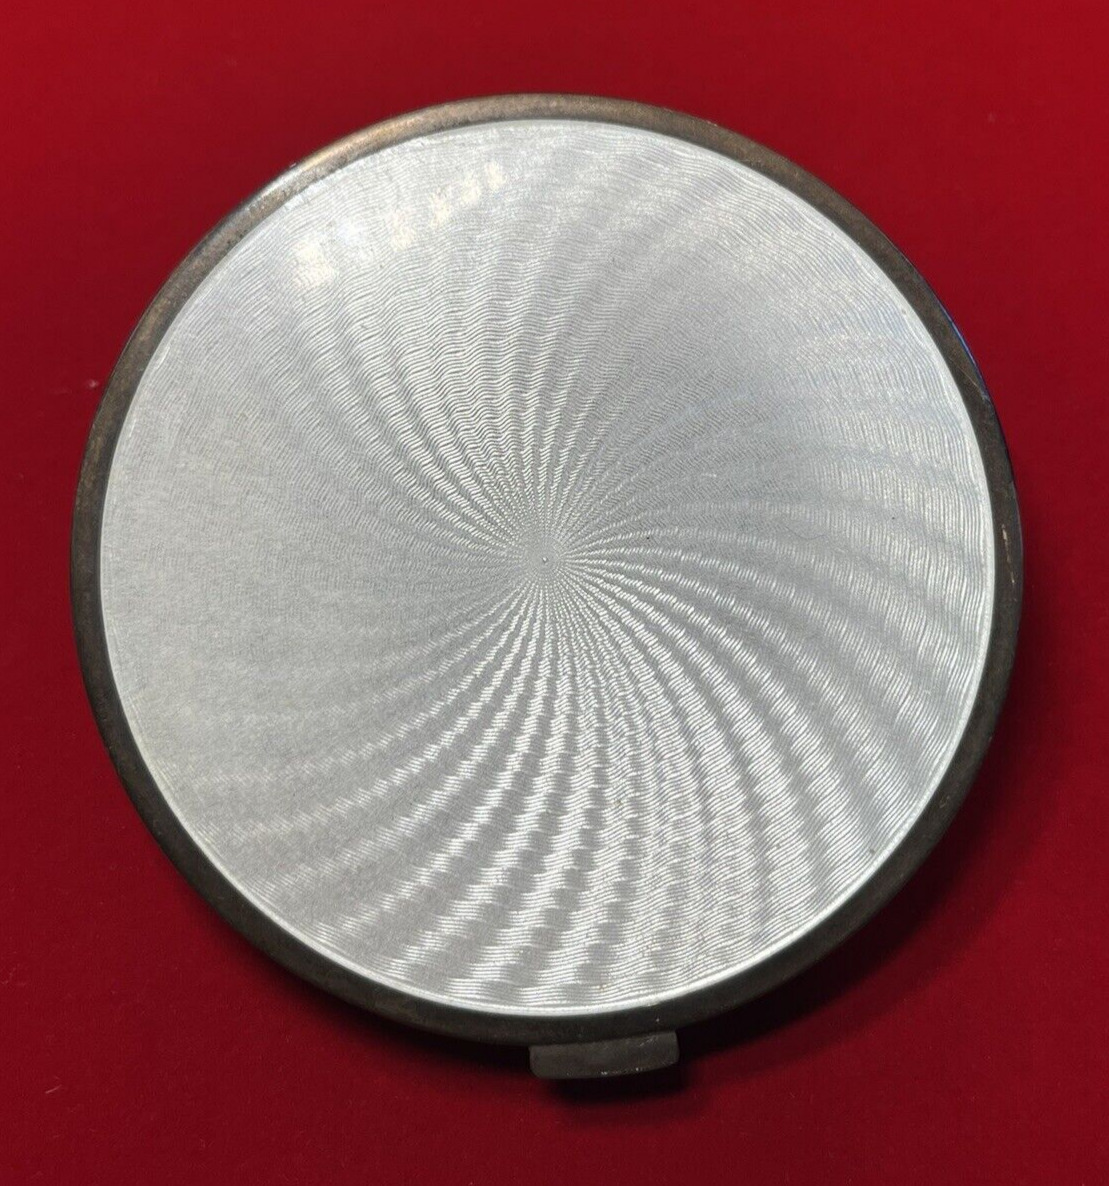 European Guilloche Enamel on Sterling Silver Mirrored Compact